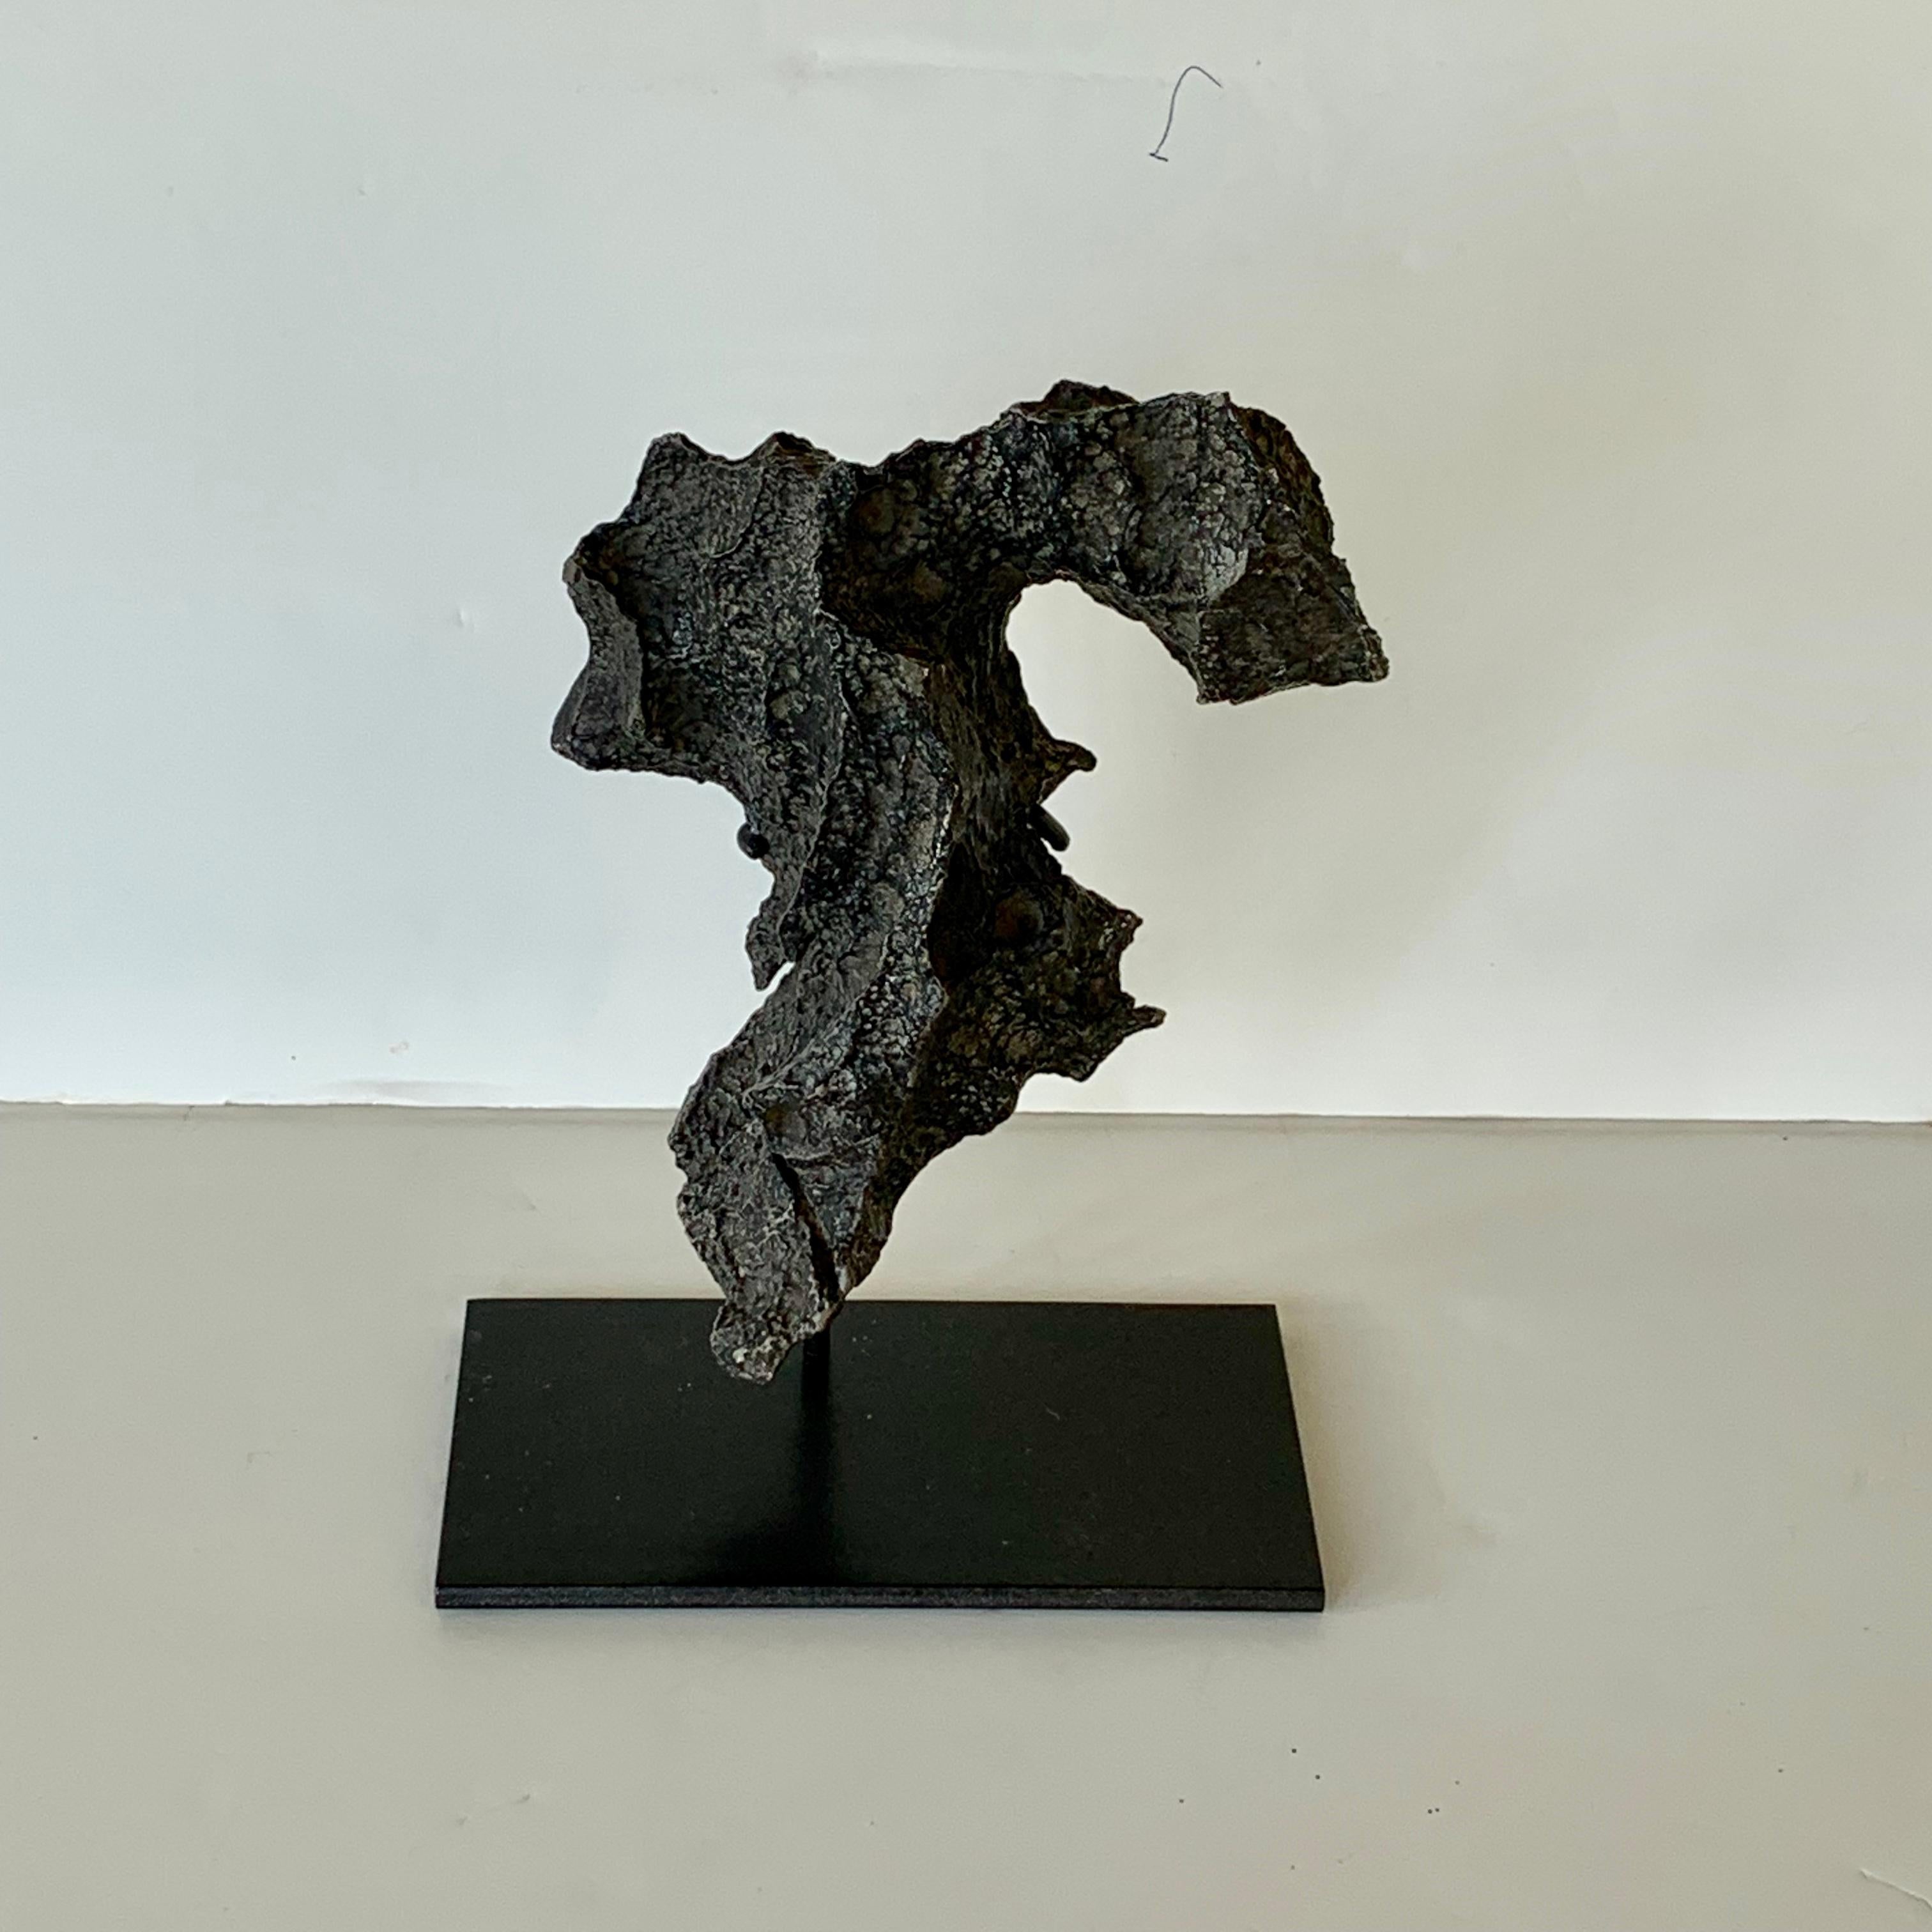 Prehistoric piece of vertical iron ore stone sculpture mounted on custom steel 
Stand measures 10